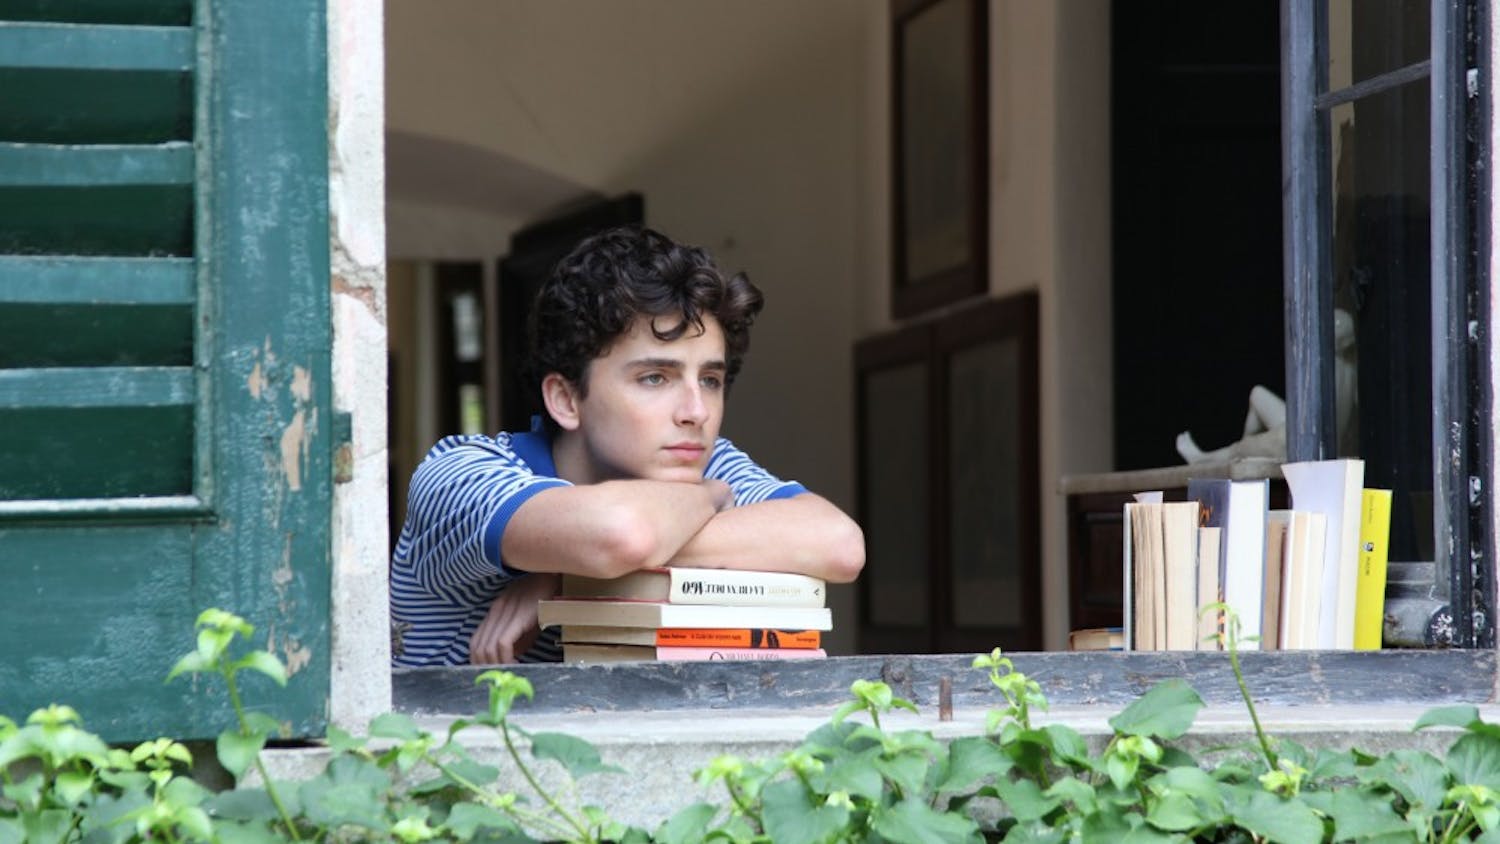 In "Call Me By Your Name," Elio Perlman is spending the summer with his family at their vacation home in Lombardy, Italy. When his father hires a handsome doctoral student, the curious 17-year-old finds himself developing a growing attraction to the young man.